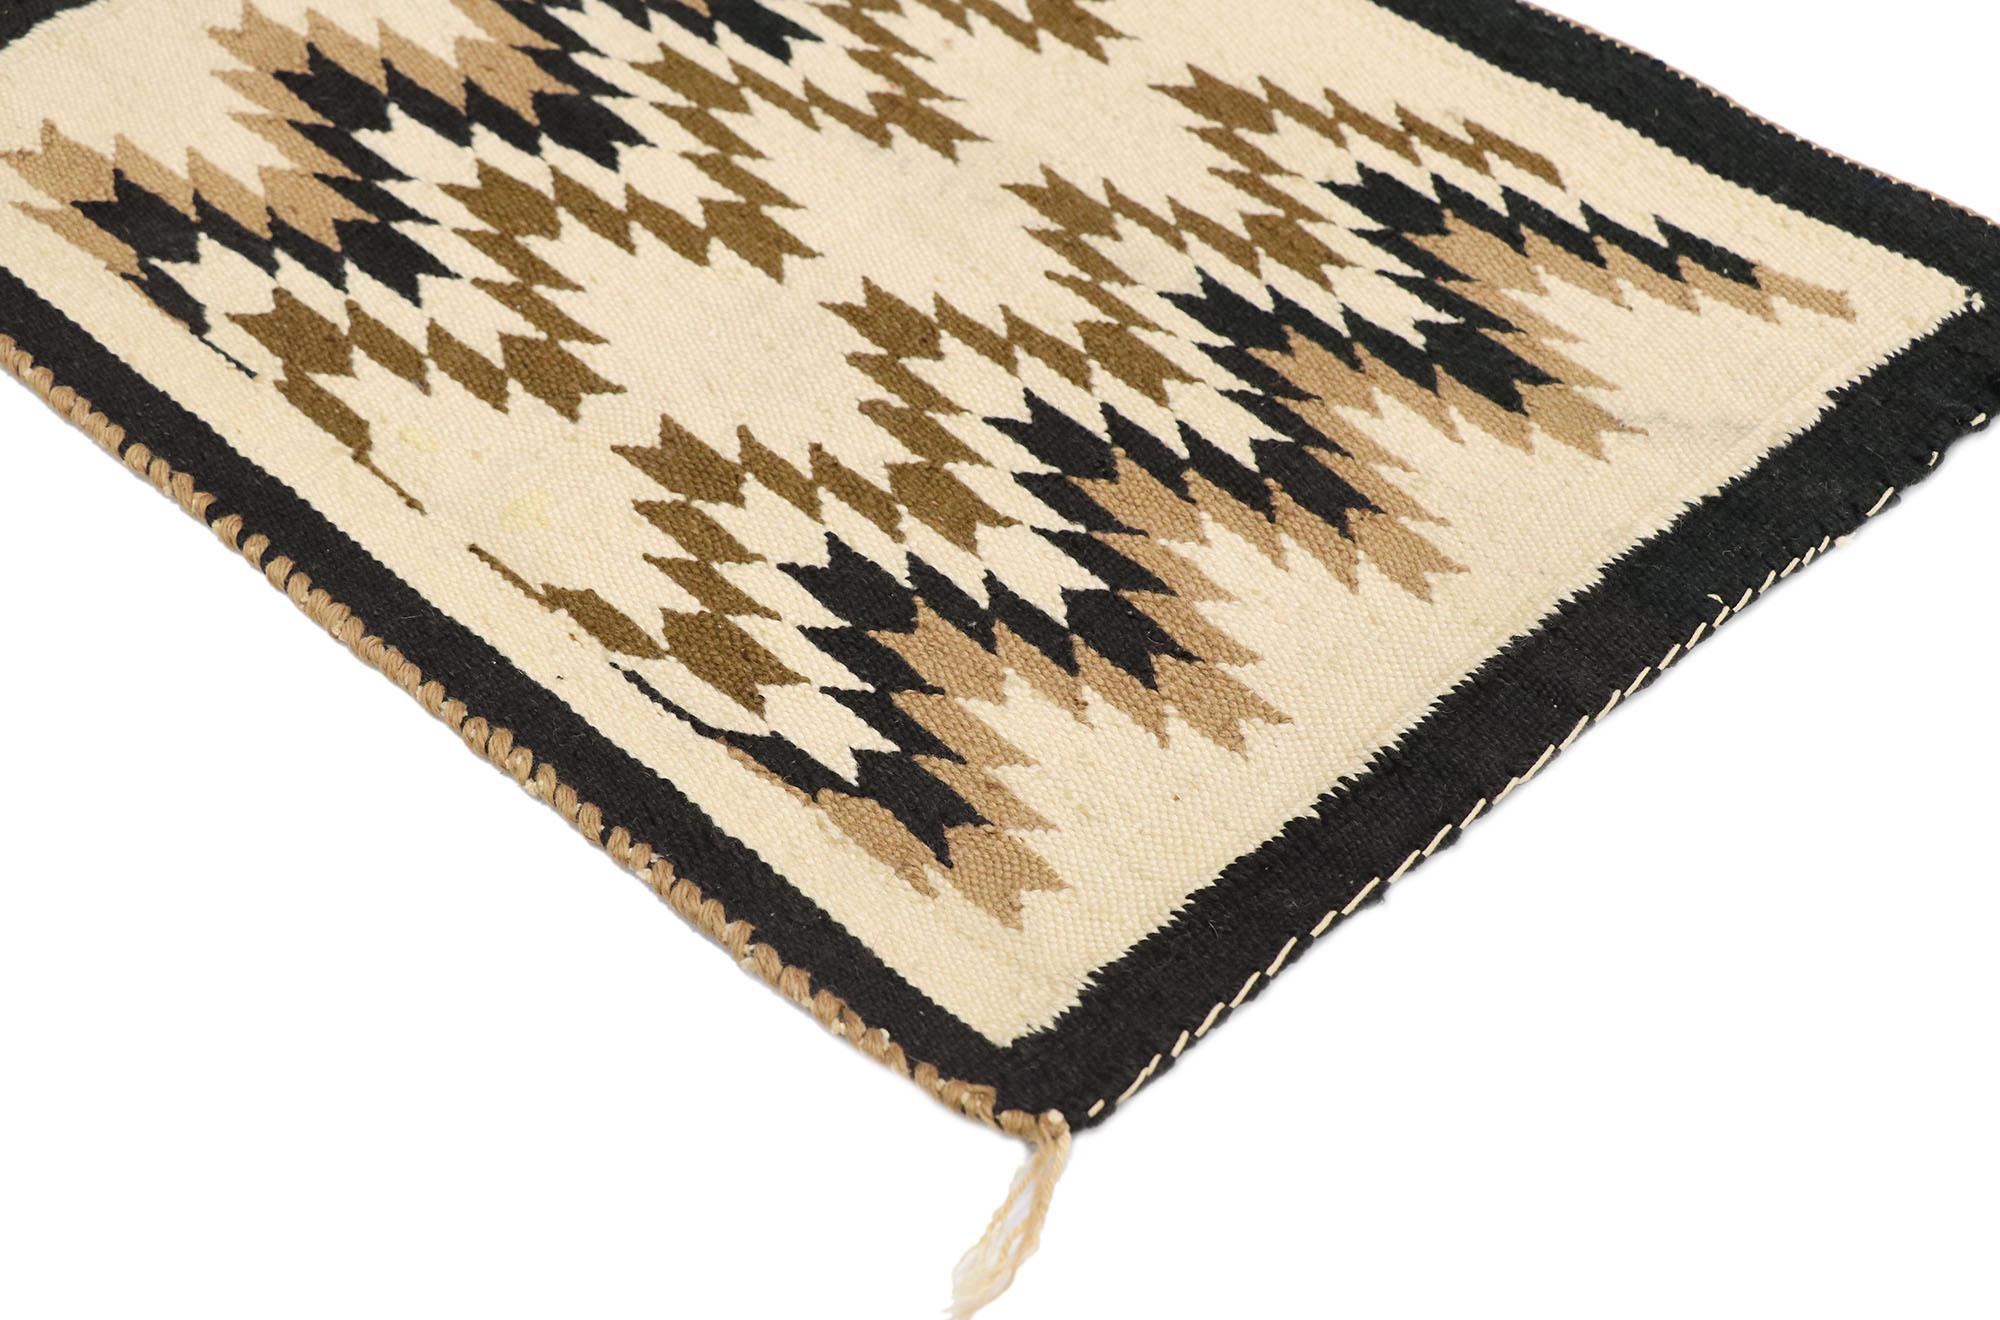 77780 antique Navajo Kilim rug with two grey hills style 01'06 x 02'00. With its bold expressive design, incredible detail and texture, this hand-woven wool vintage Navajo Kilim rug is a captivating vision of woven beauty highlighting Native